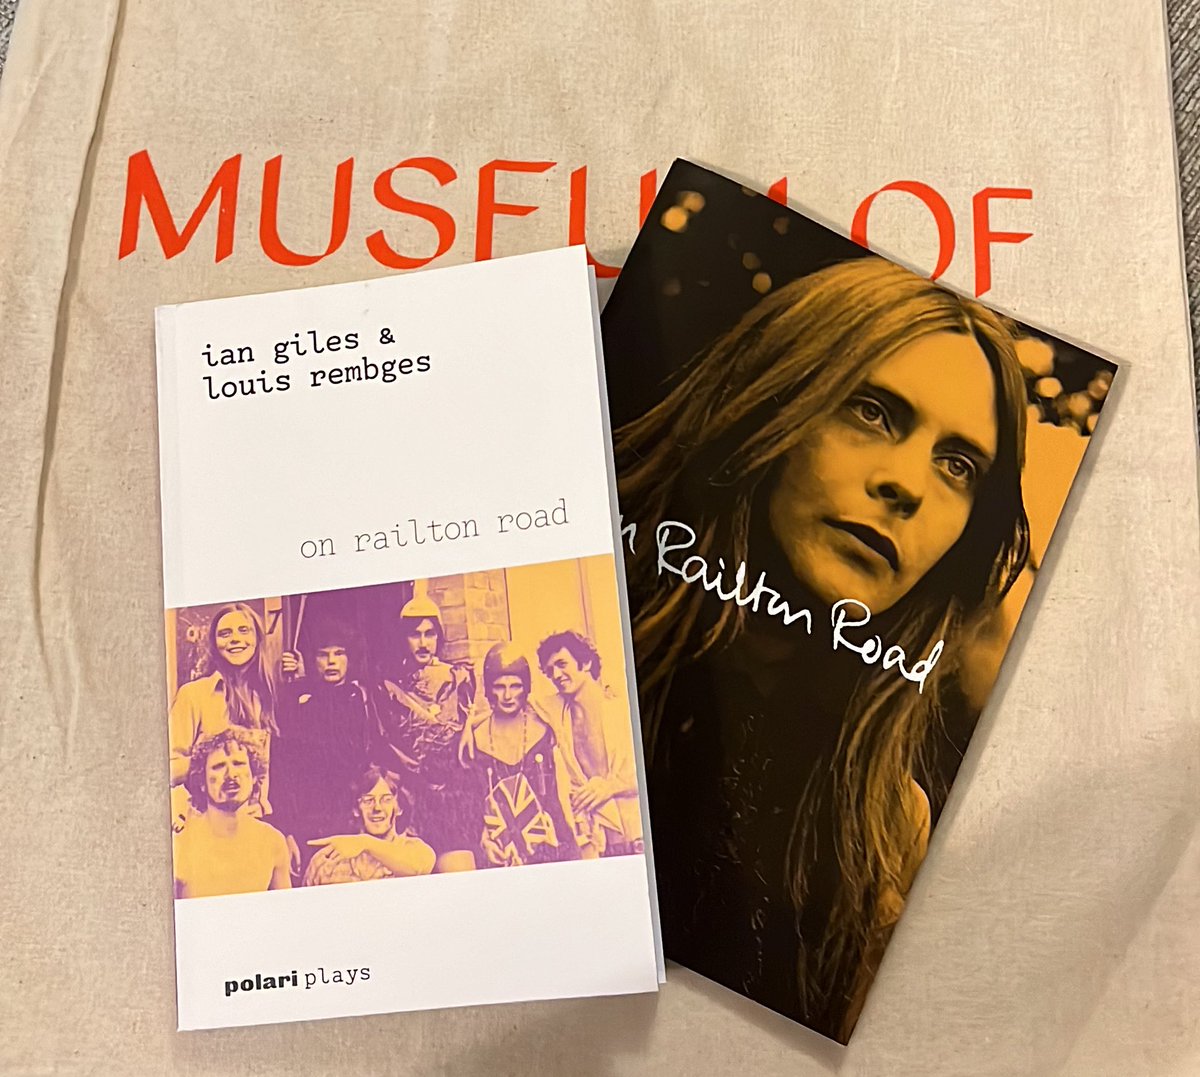 And bought the script (from @polaripress) and the photo book of photos from the 1970s by Ian Towson, held at the @BishopsgateInst - both super.